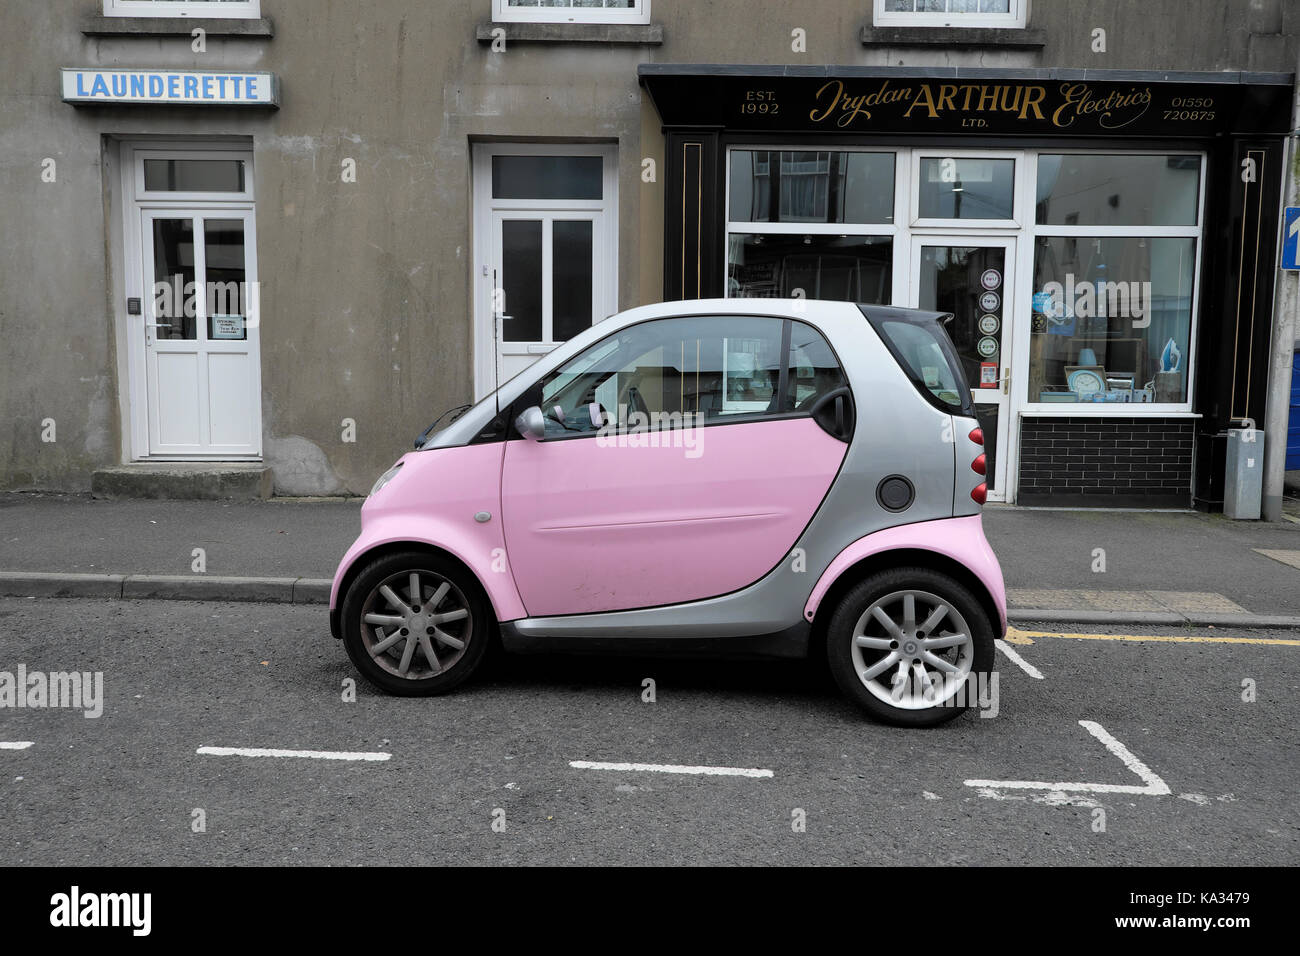 A pink and silver Smart Car parked in a parking space outside a laundrette in a Llandovery street Carmarthenshire, Wales, UK  KATHY DEWITT Stock Photo